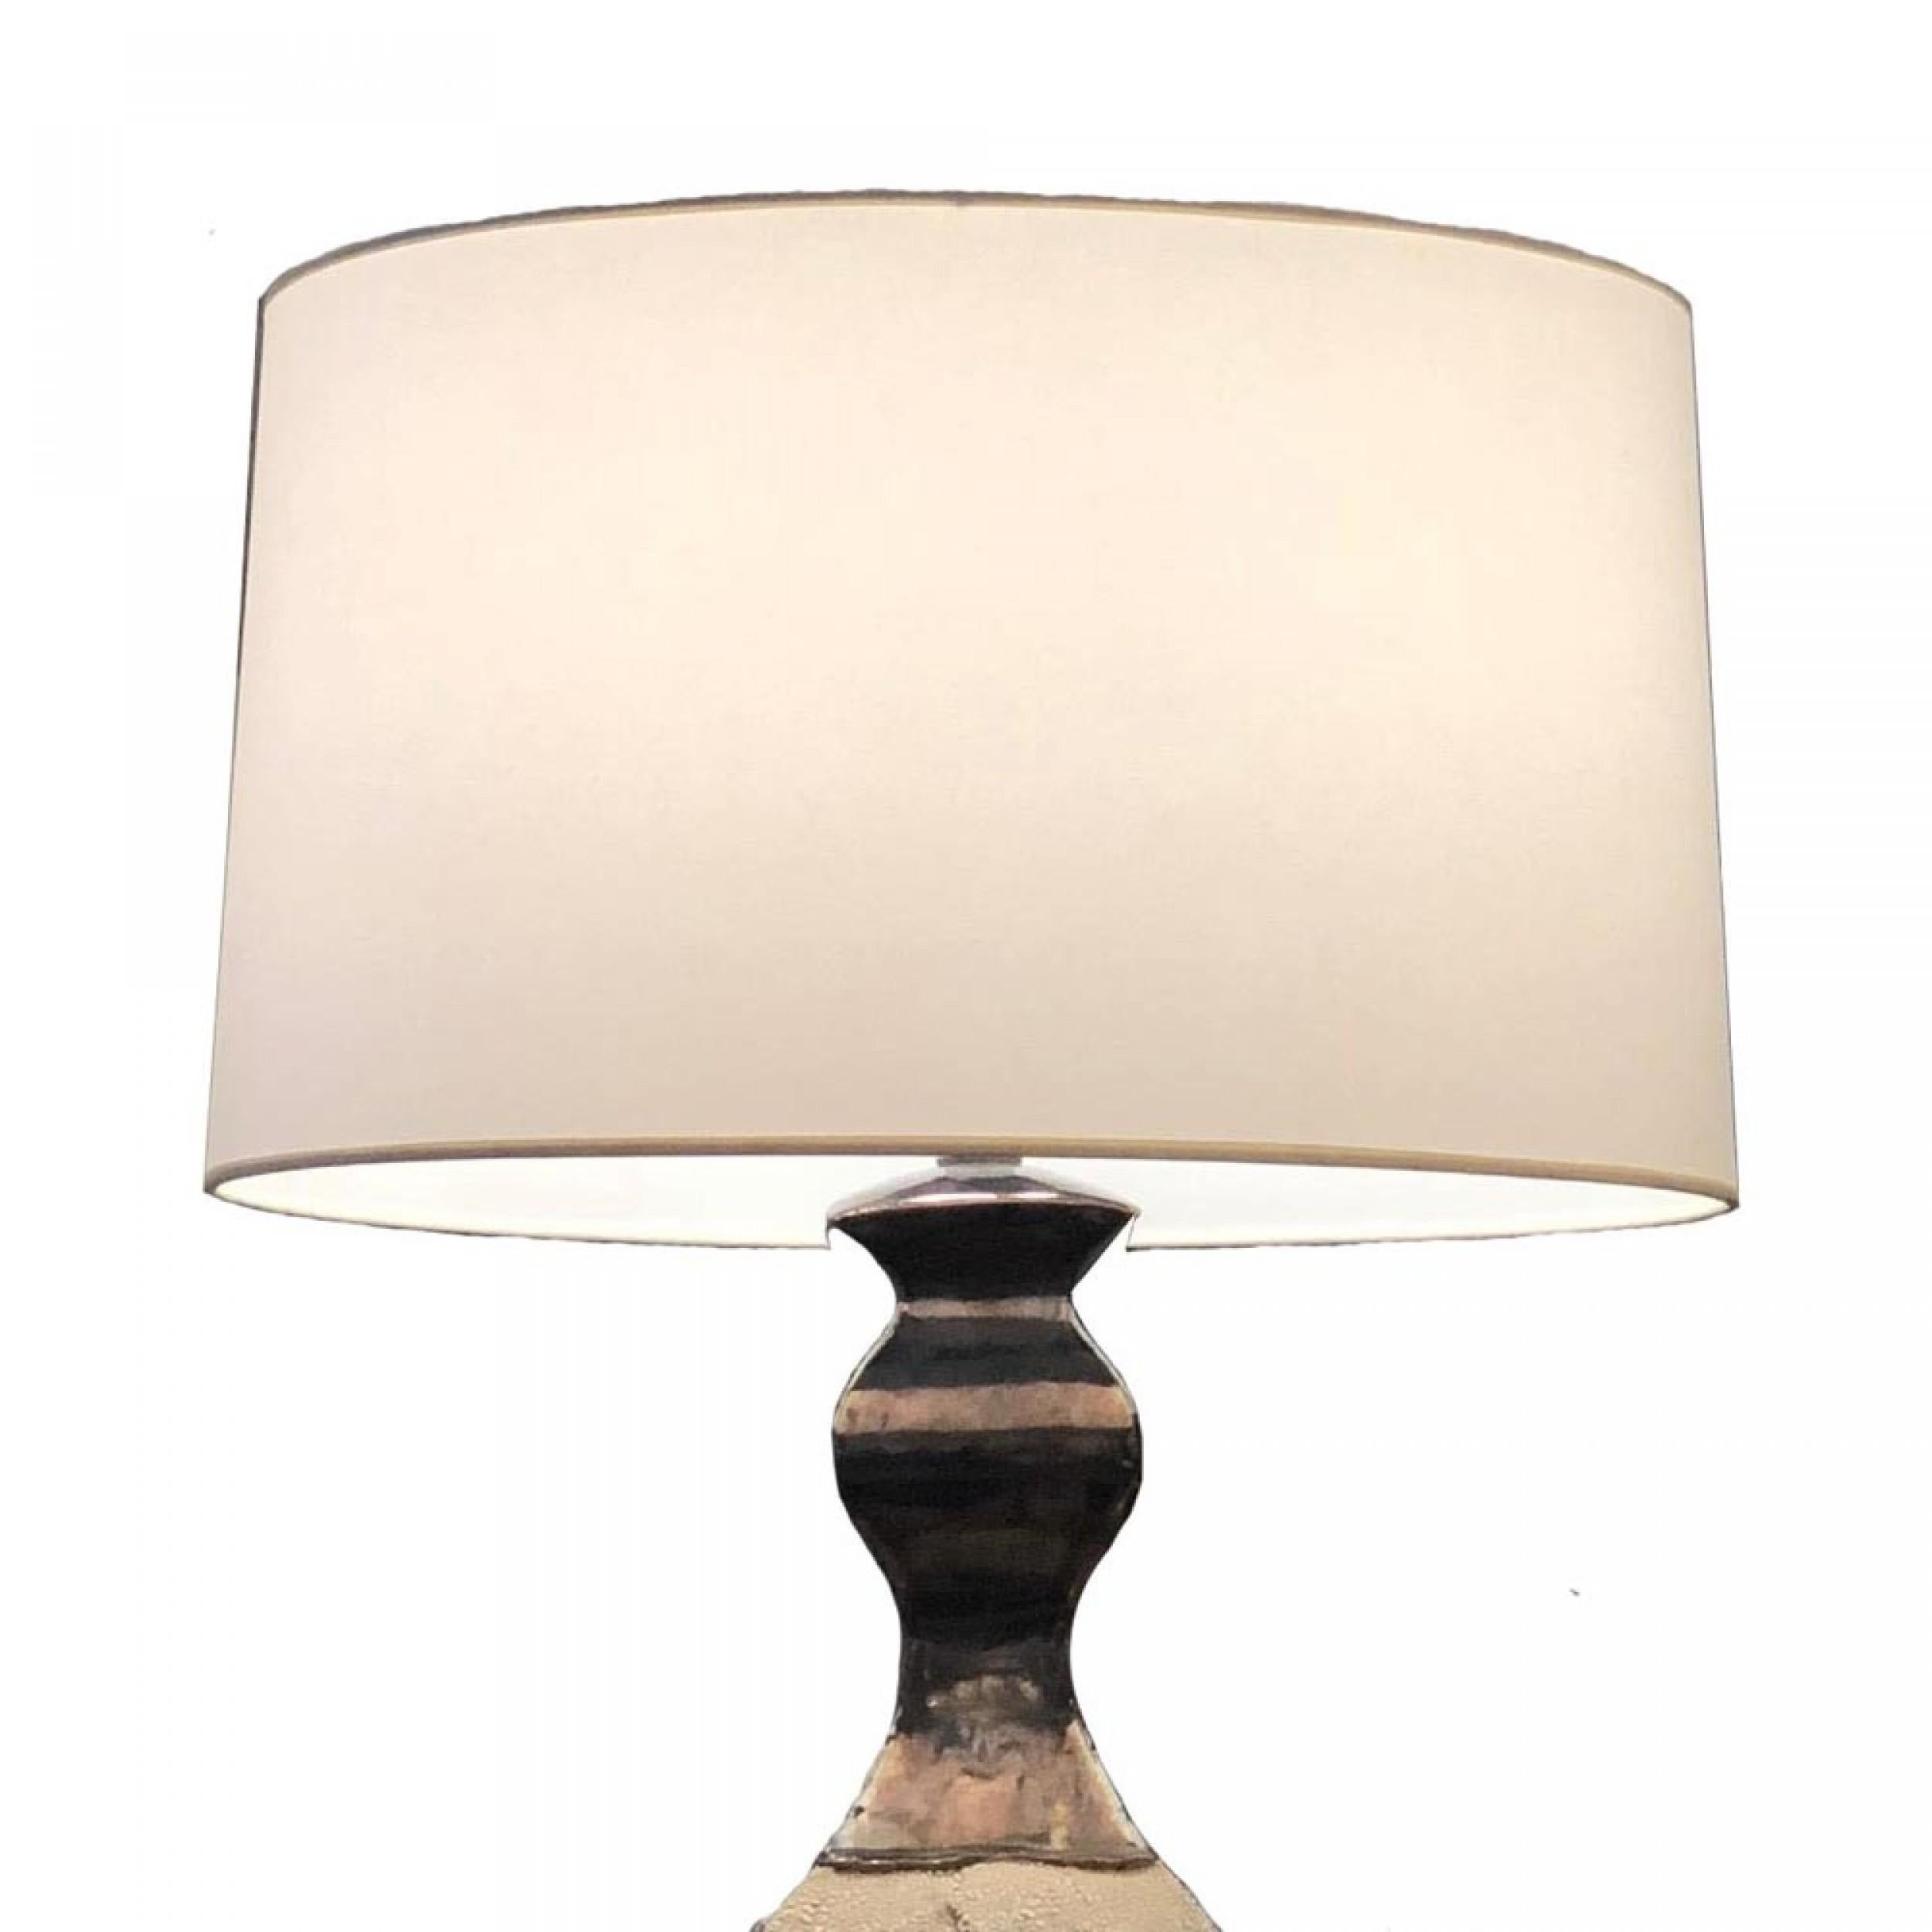 American postwar design grey and white textured bulbous square base table lamp with a glazed tapered and flared neck designed by acclaimed and collectible artist Gary DiPasquale.
   